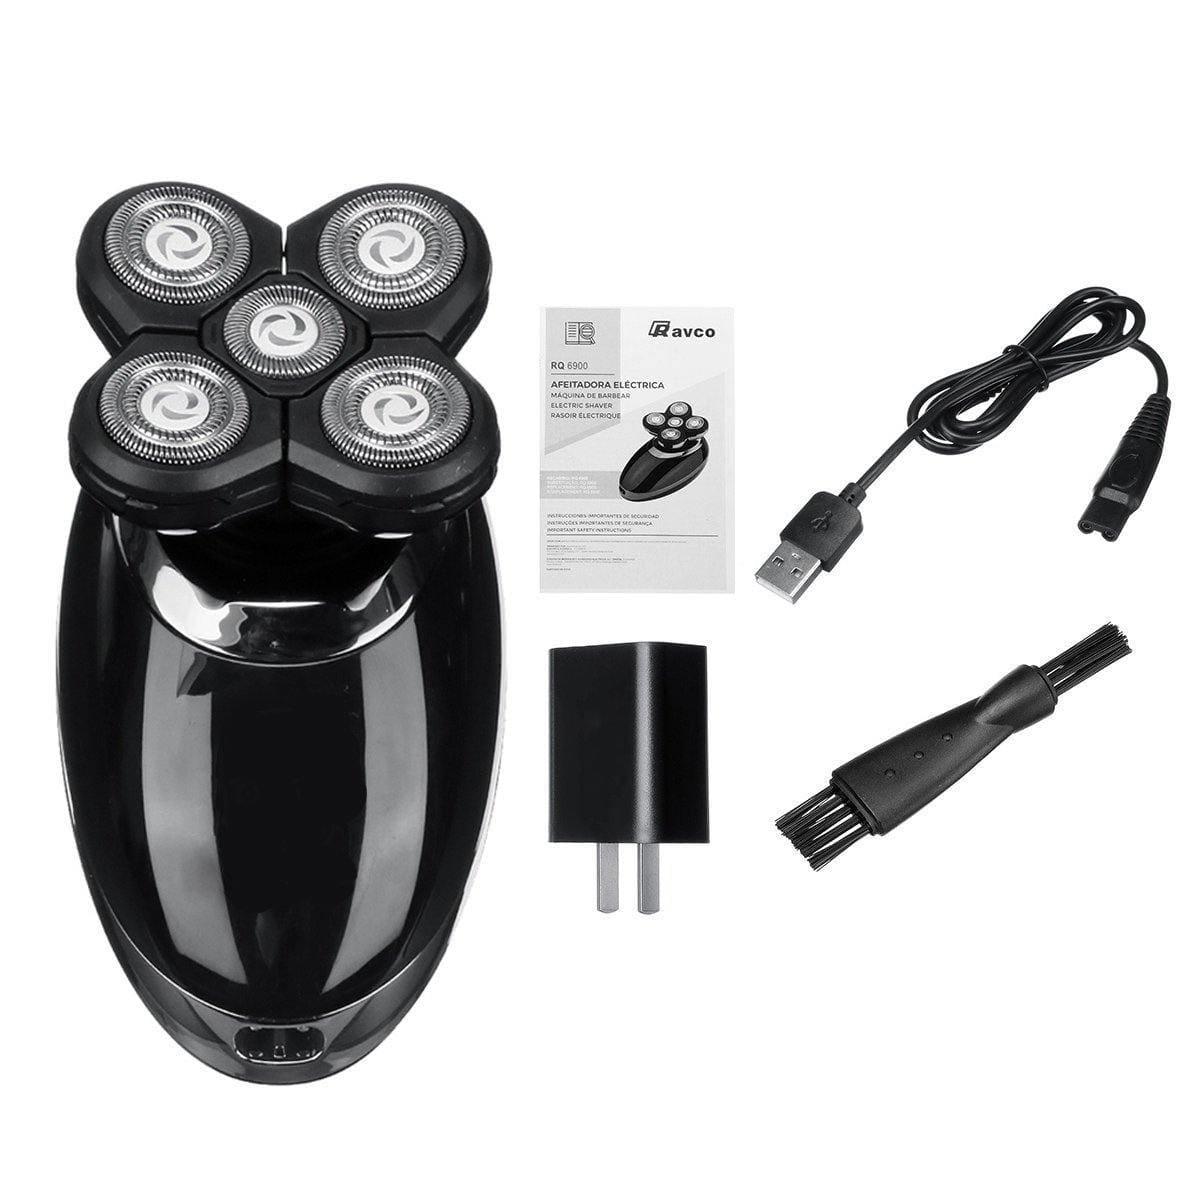 ezy2find Razor A 3 IN 1 Electric Cordless 5 Head Razor Shaver Nose Hair Trimmer Hair Clipper